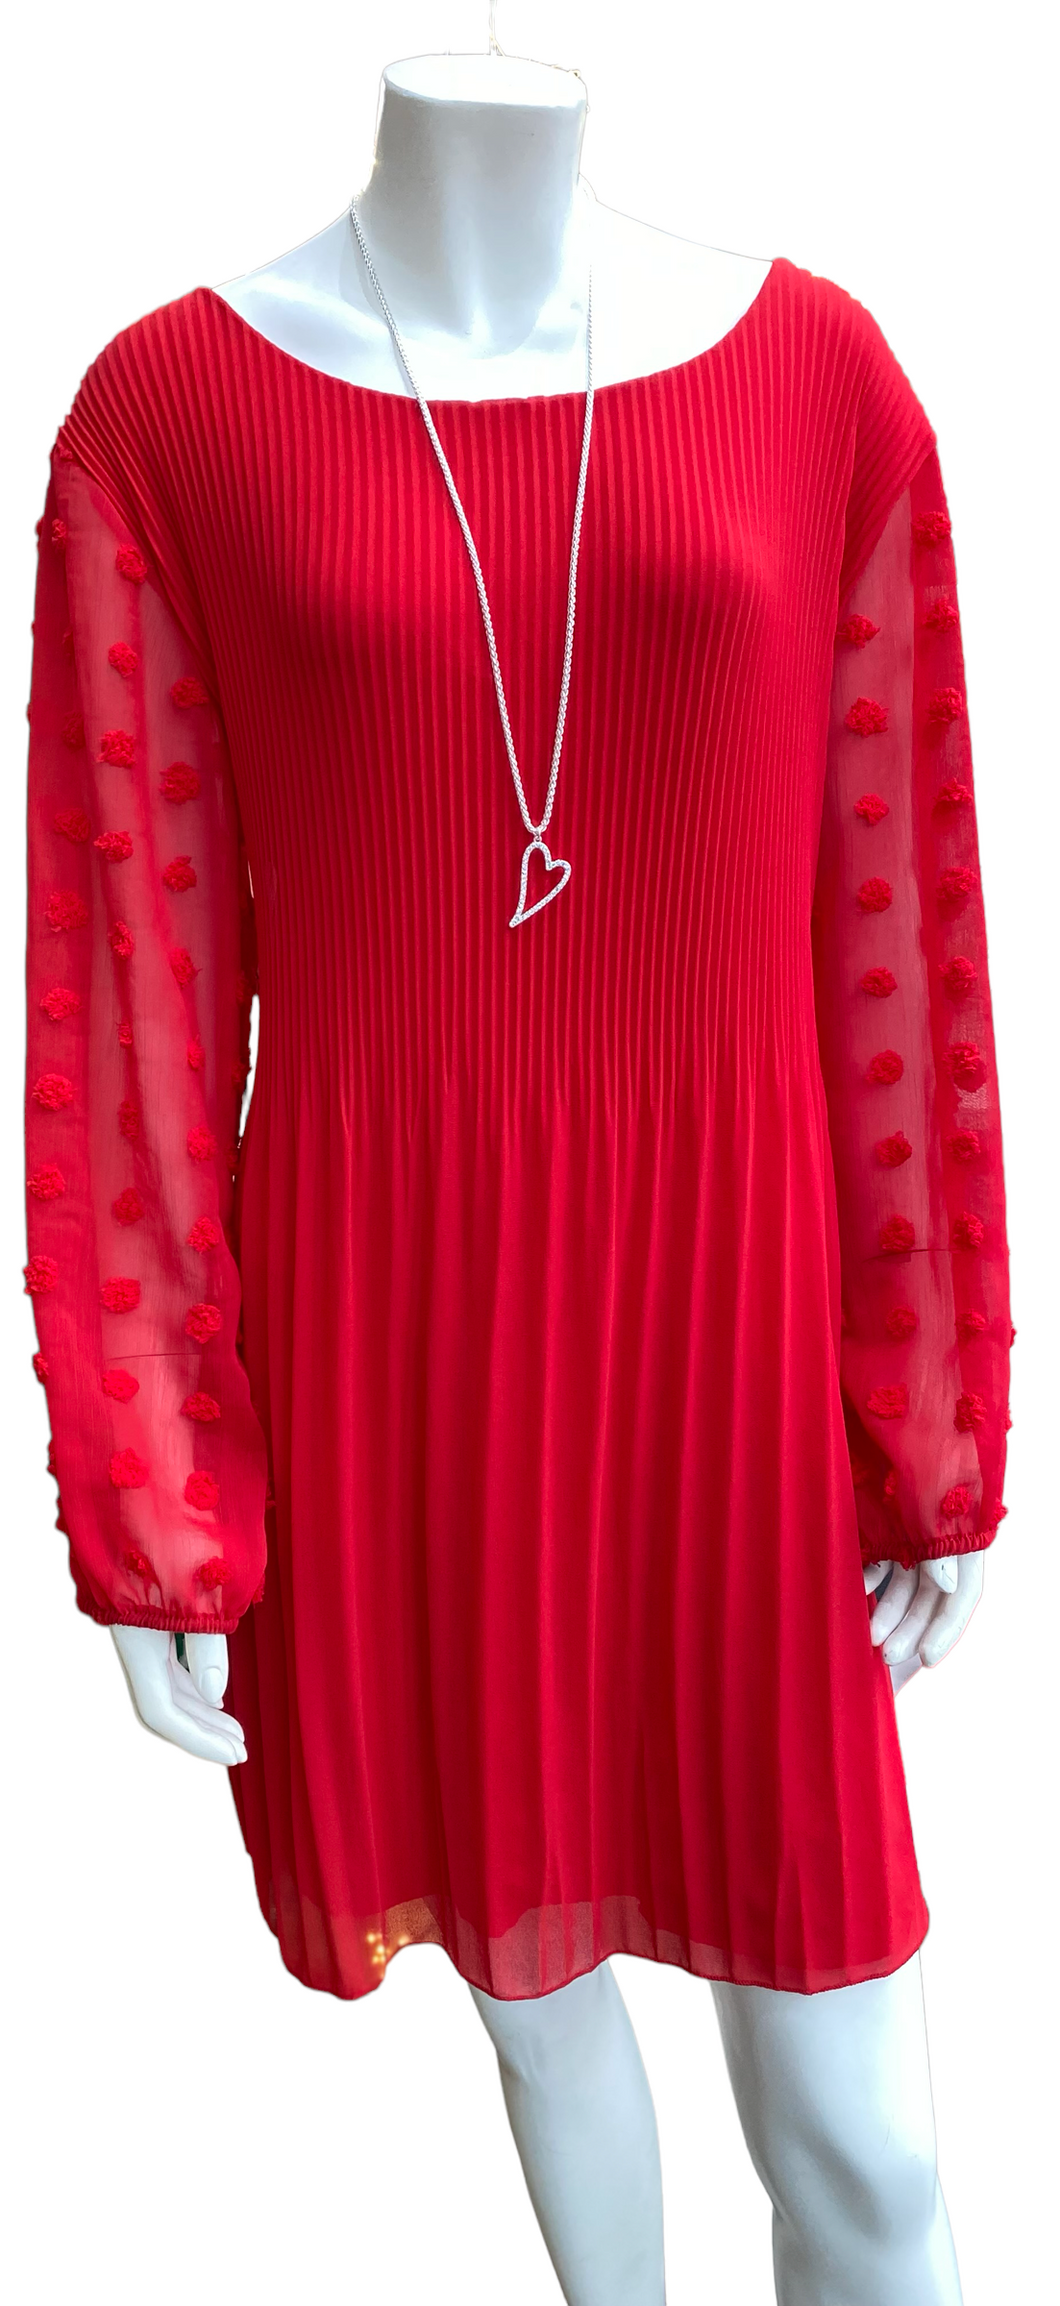 Red Pleated tunic Style Dress